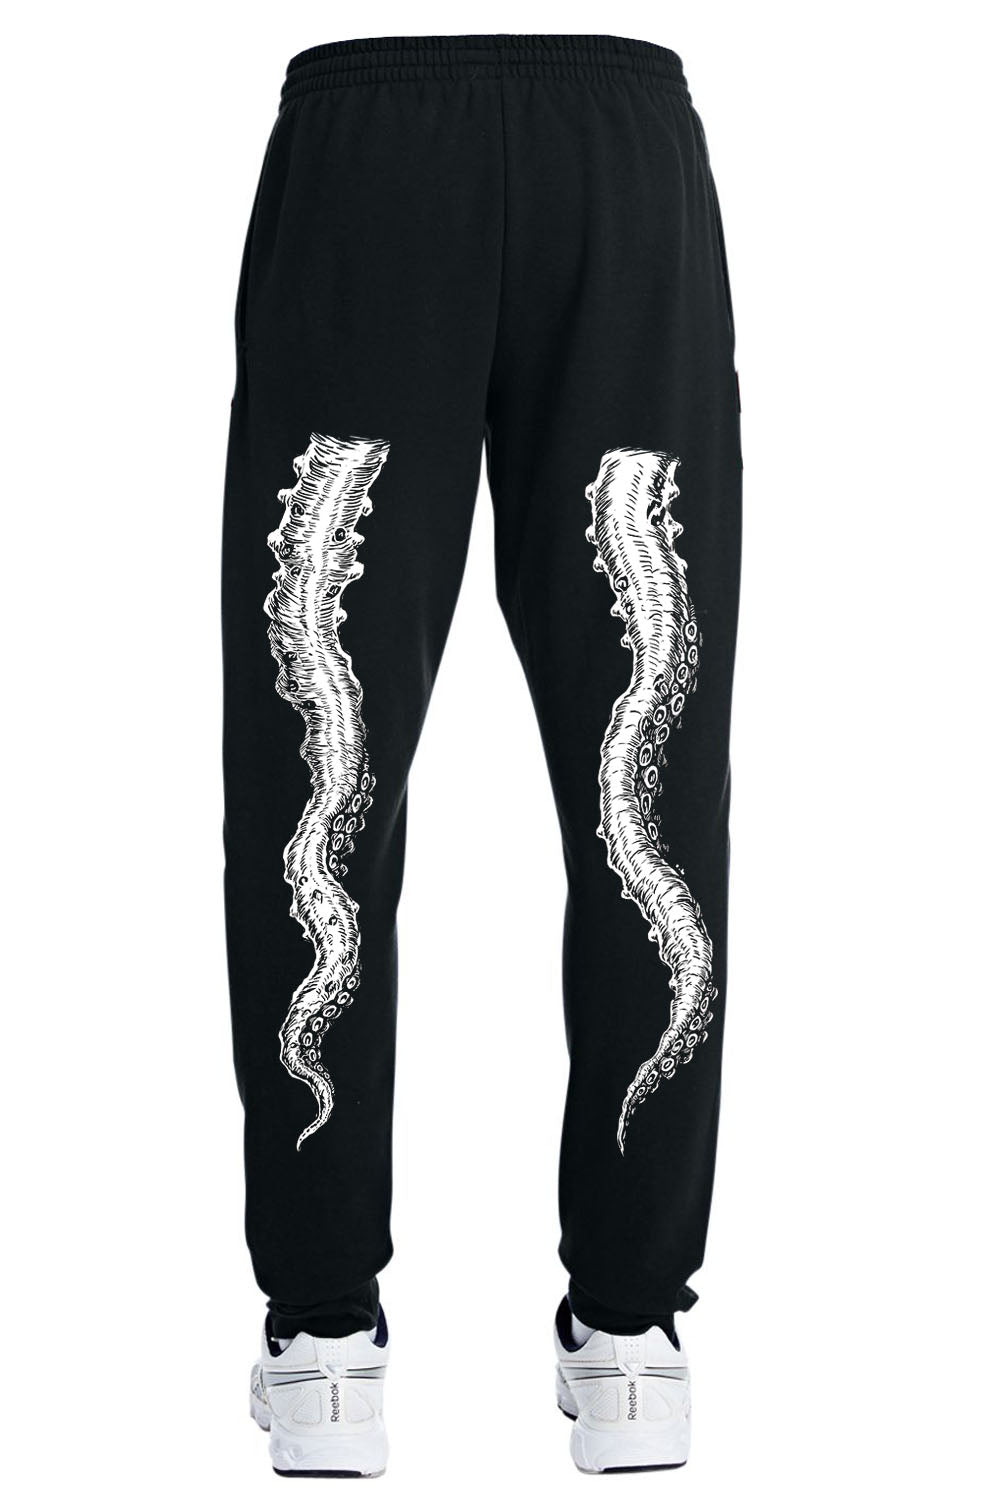 Tentacle Joggers